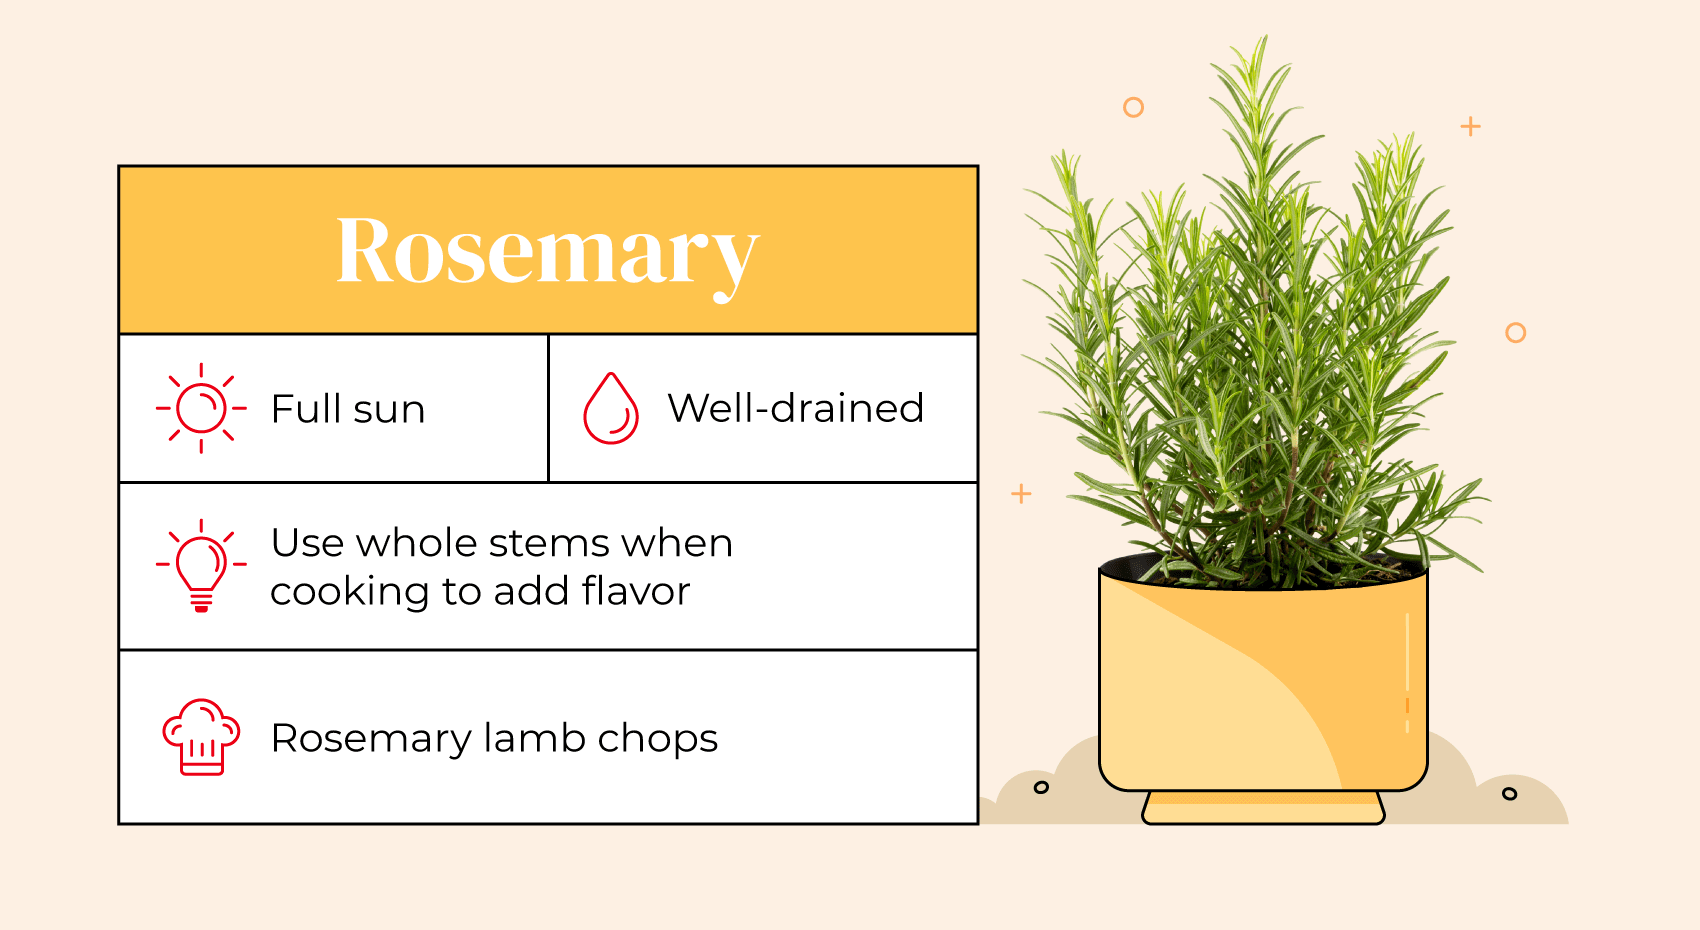 Illustrated pot with rosemary plant and care guide.